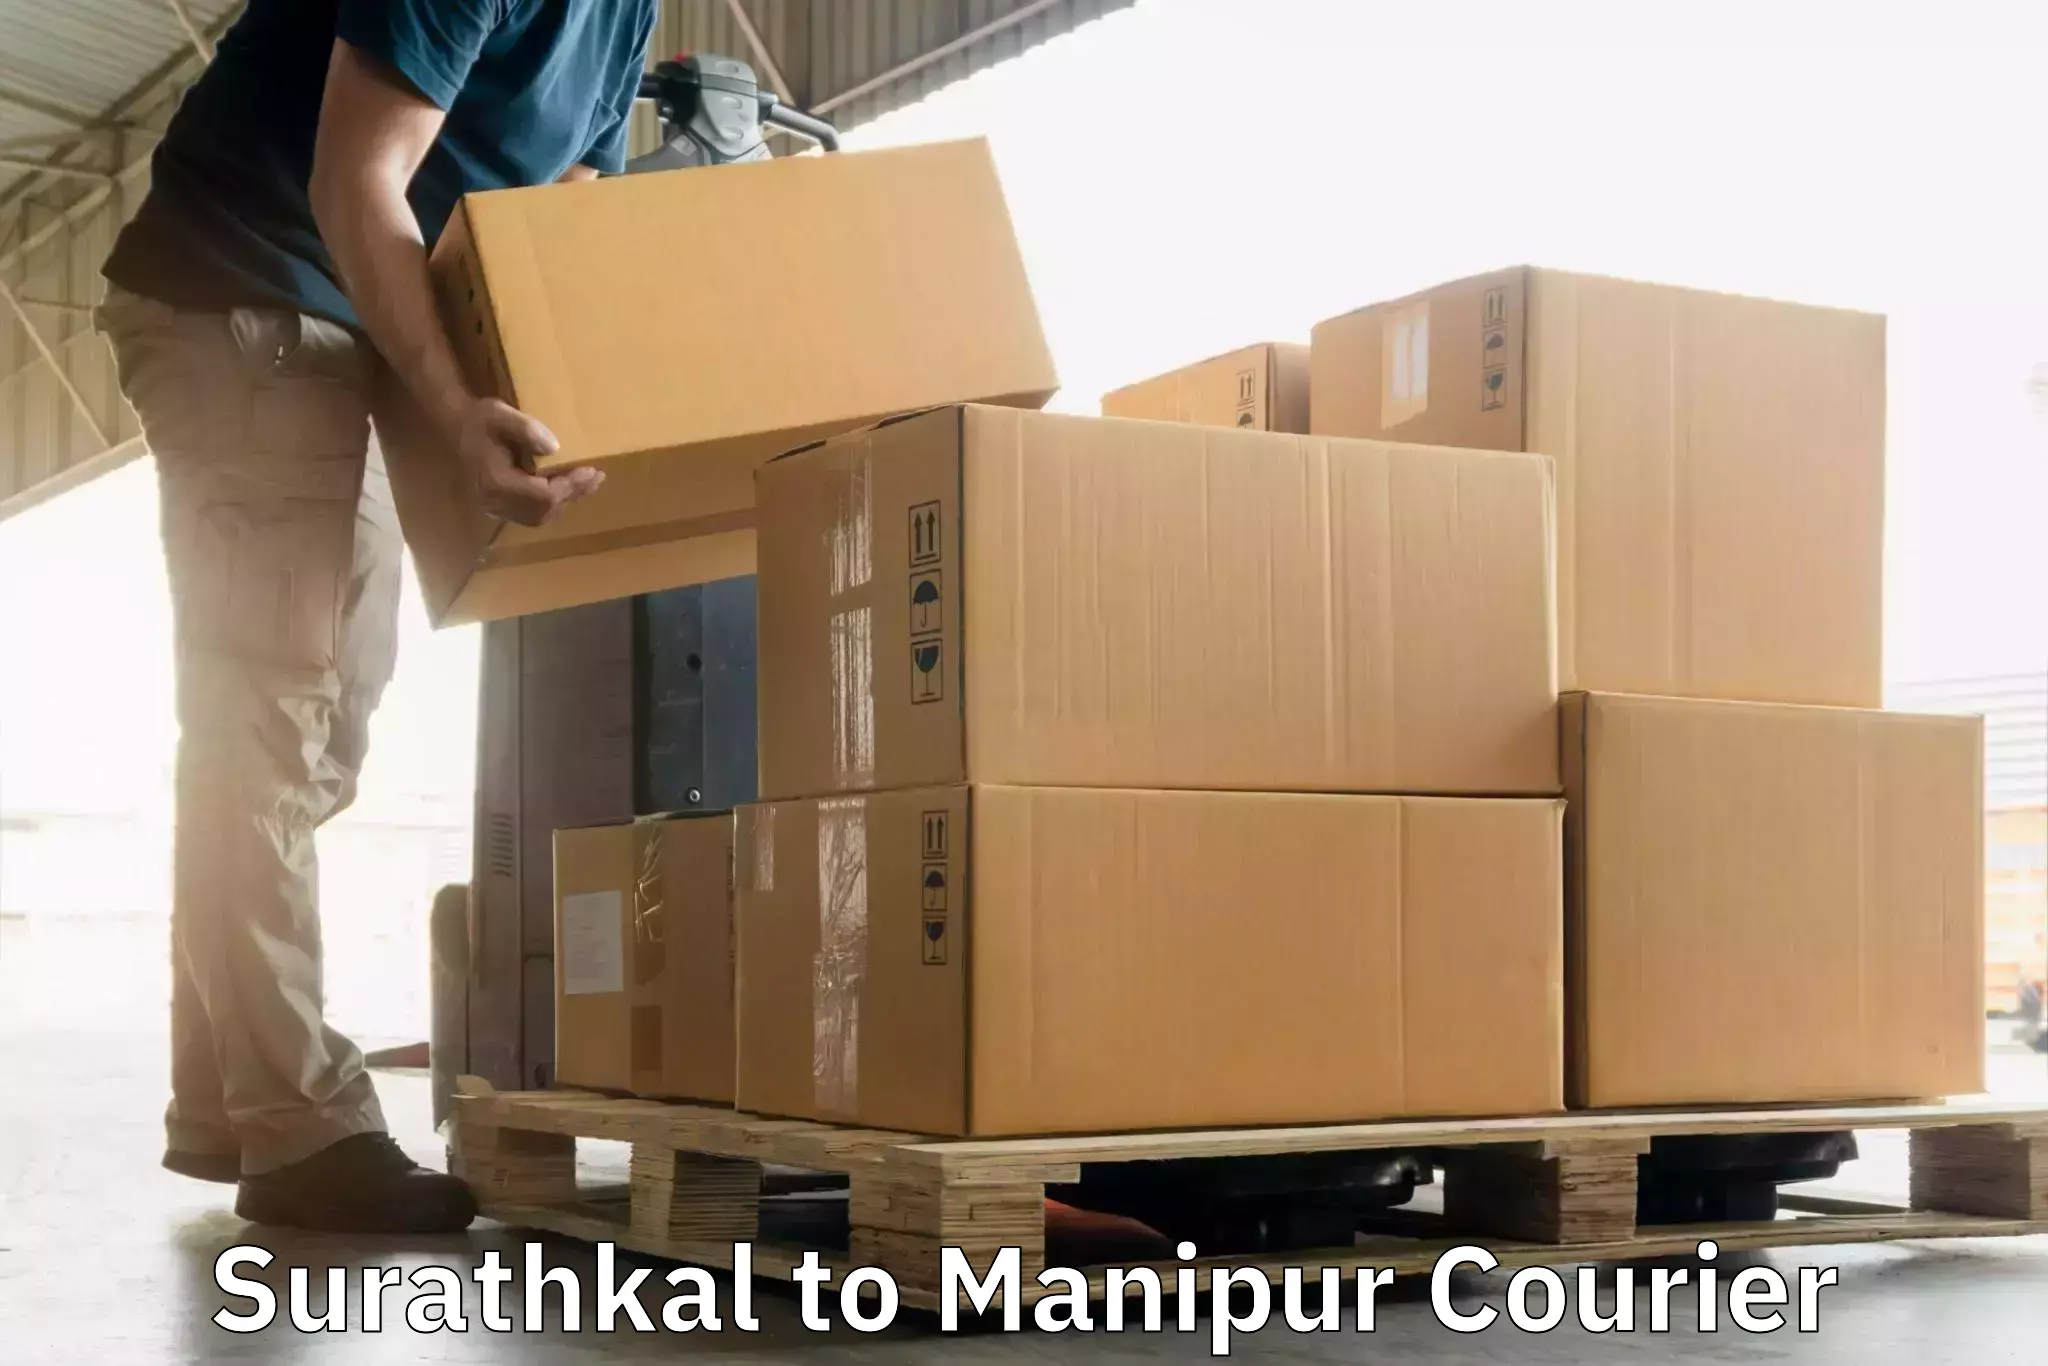 High-capacity parcel service Surathkal to Manipur